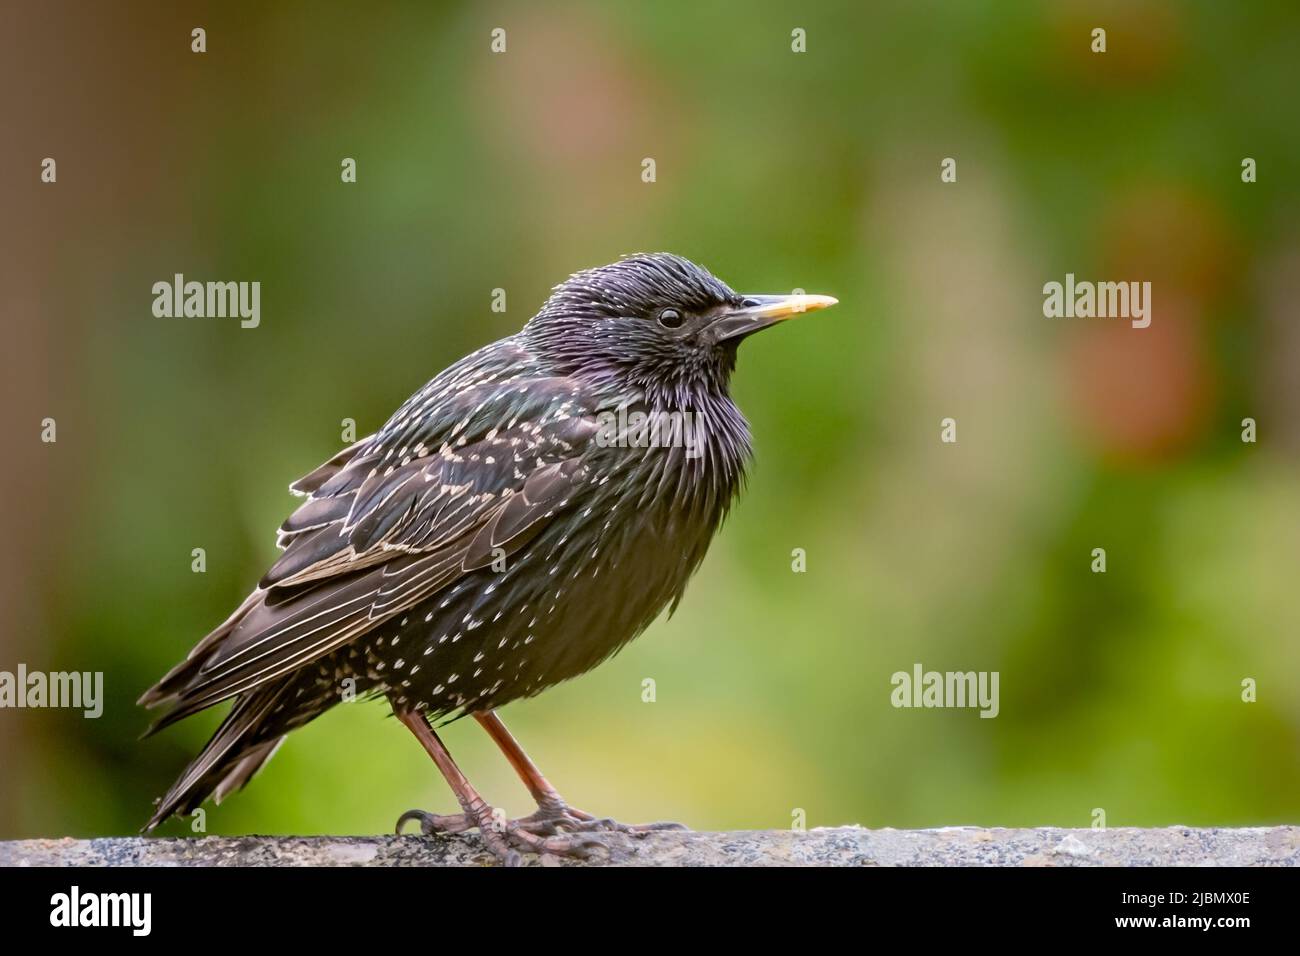 Adult starling with puffed up feathers on garden wall Stock Photo